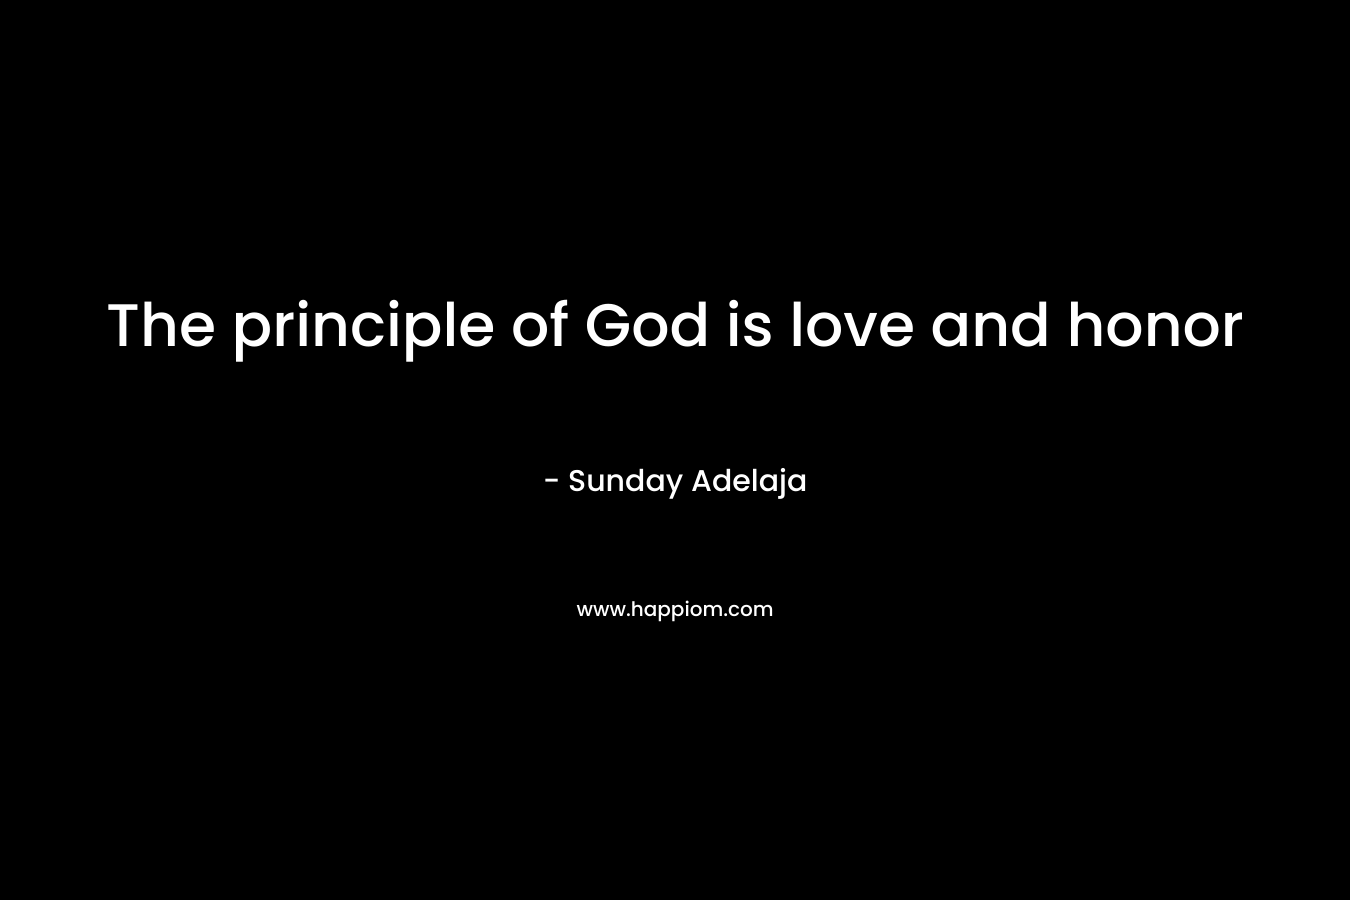 The principle of God is love and honor